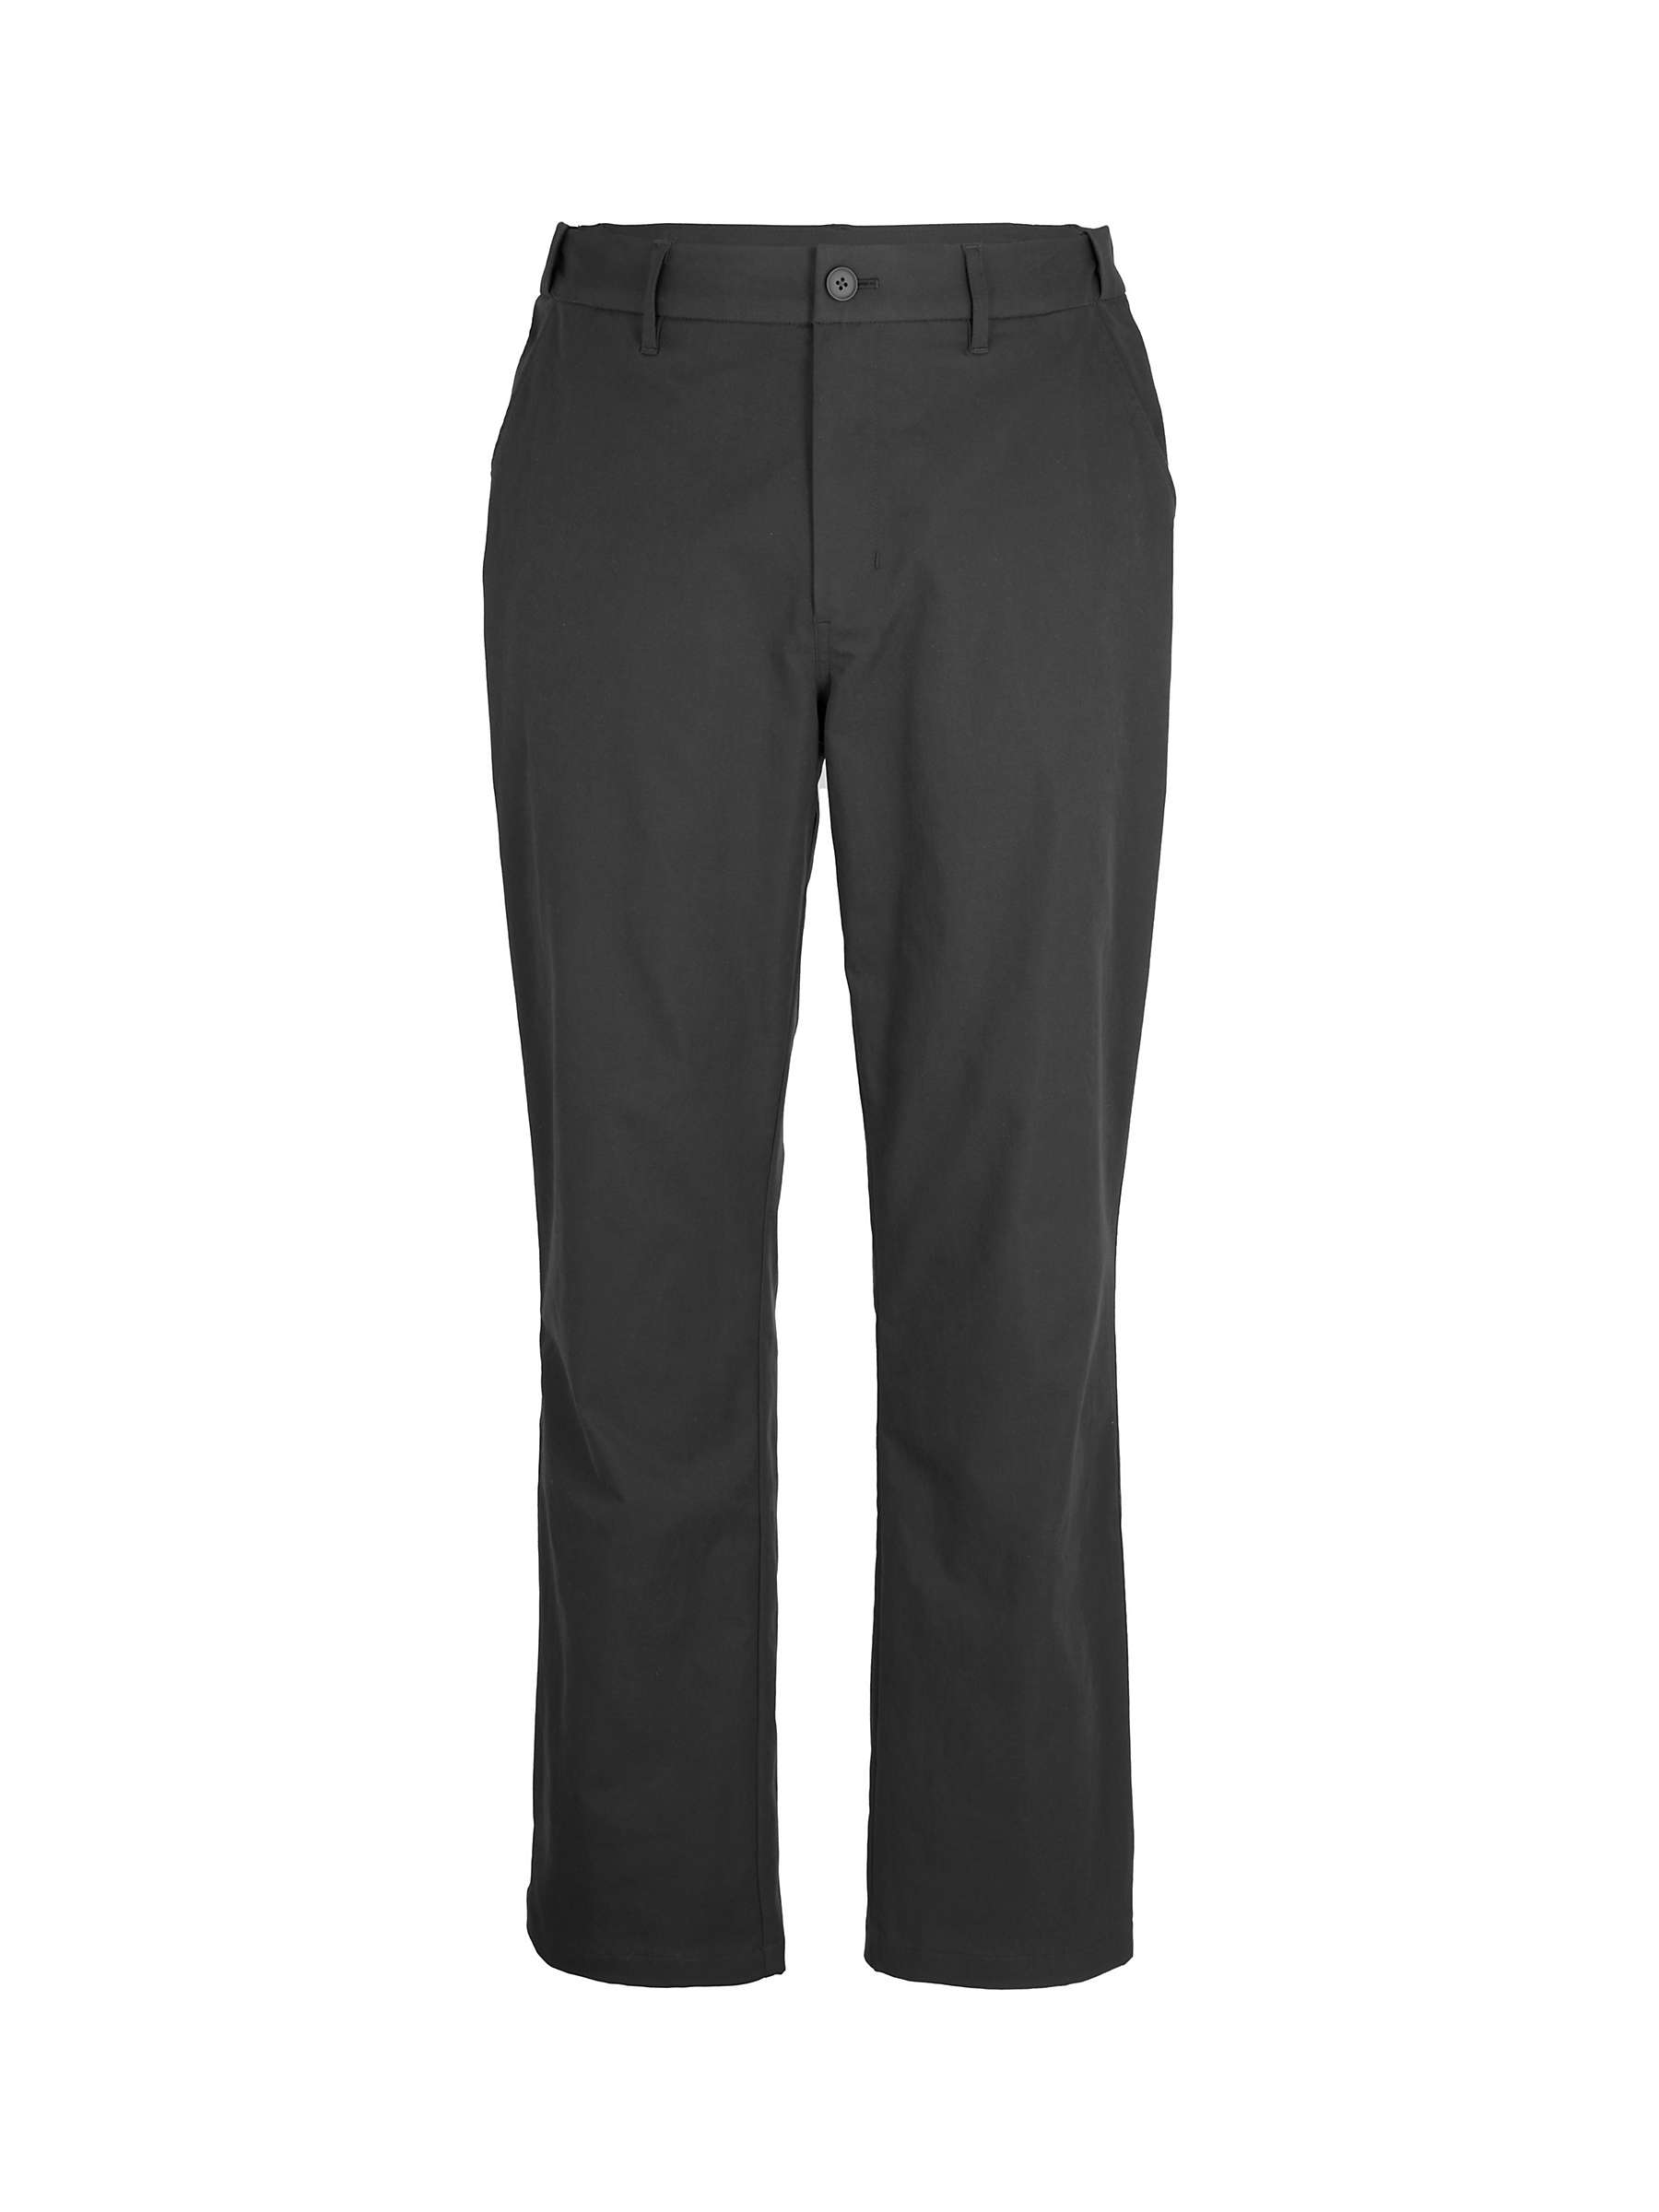 Buy Rohan Winter District Chinos Online at johnlewis.com